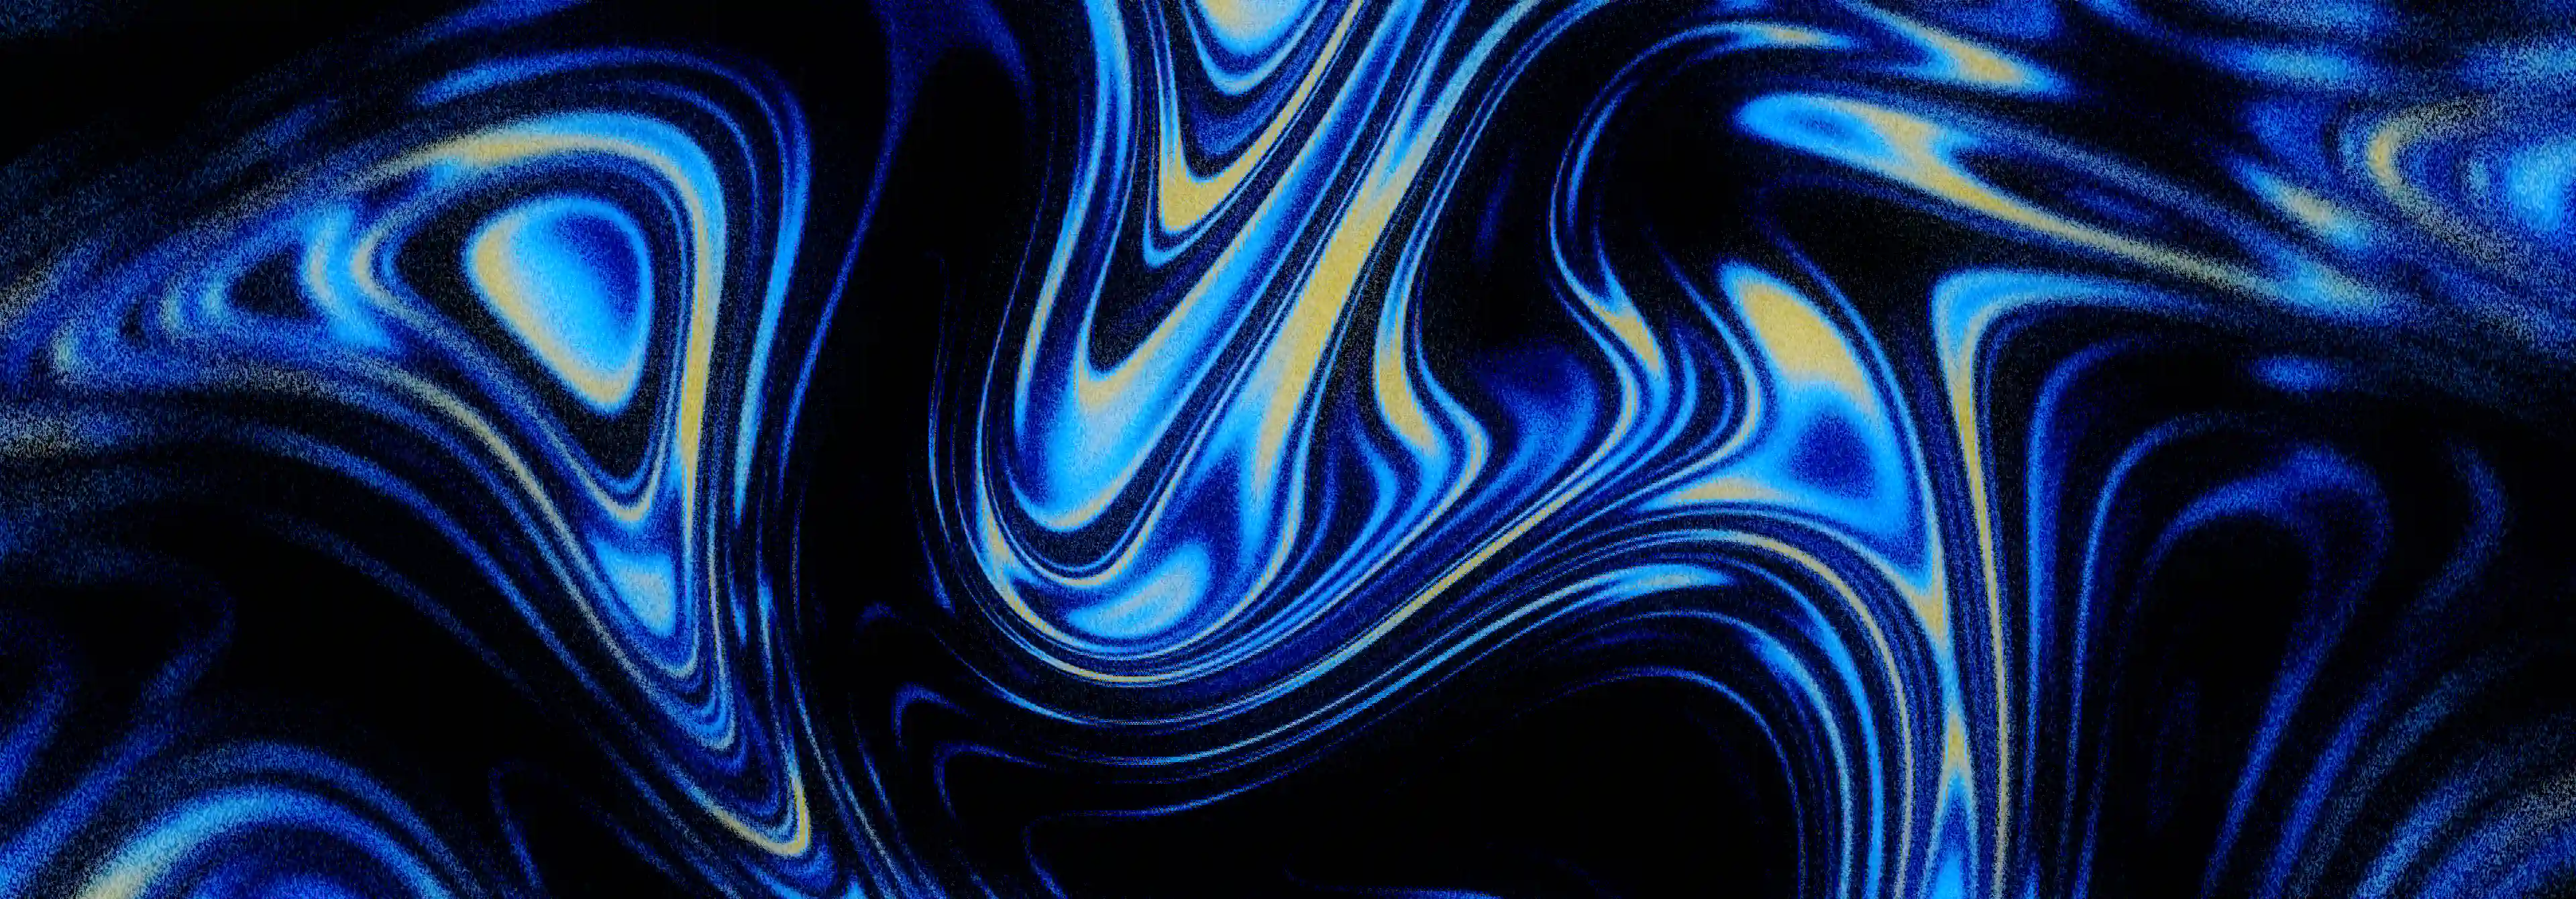 Abstract swirly background